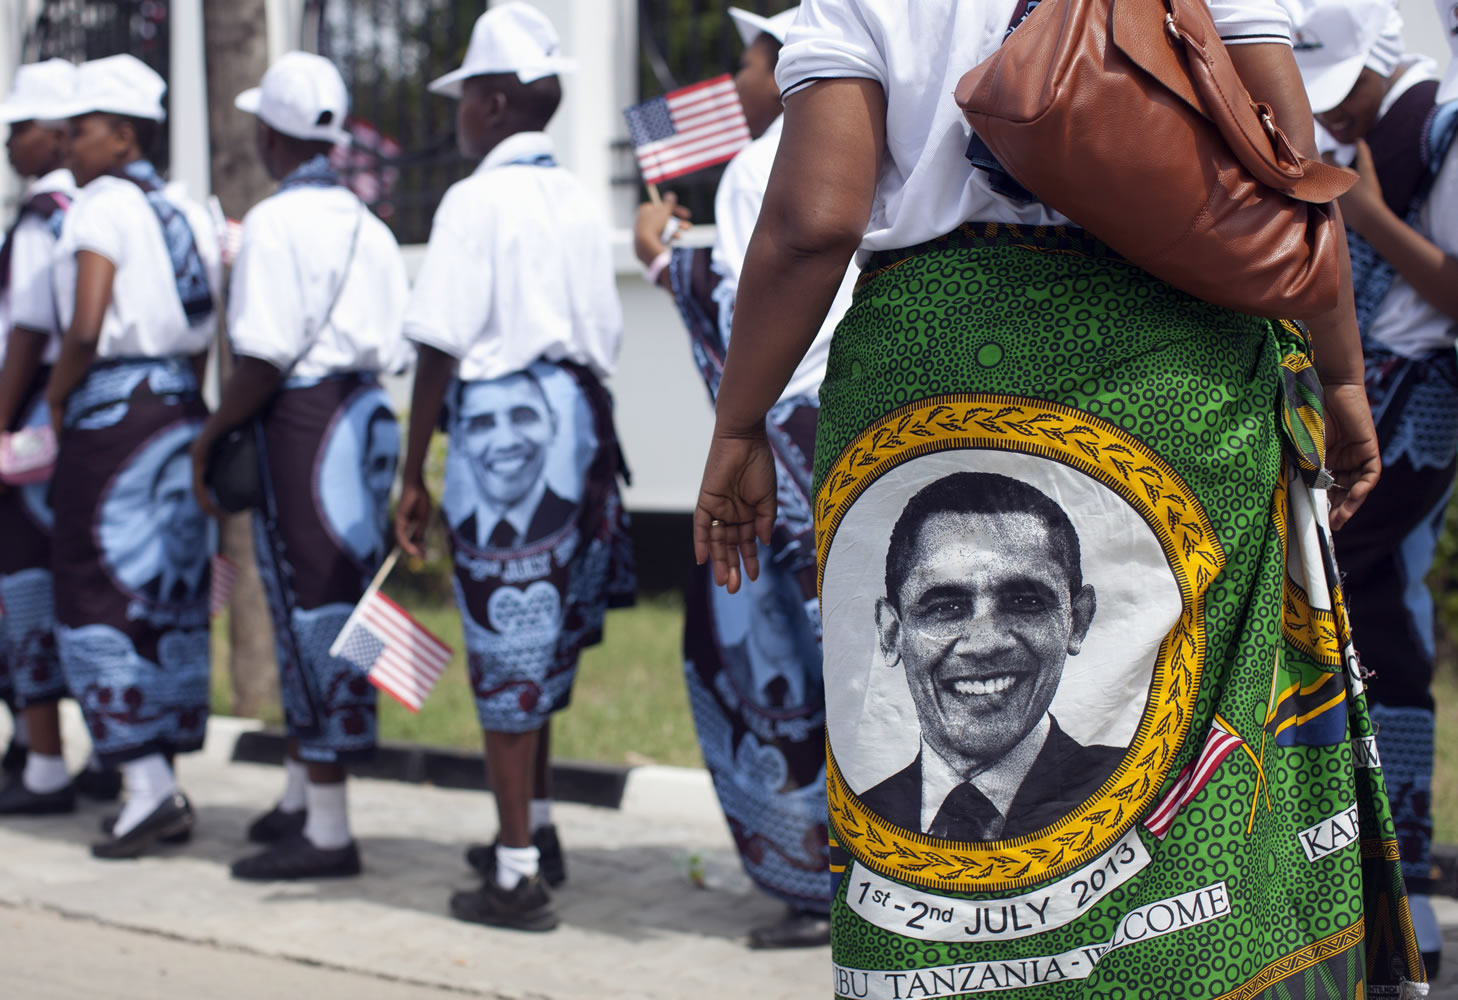 Young girls and women wear khangas, a traditional wrap, with the image of U.S. President Barack Obama as they line up to enter the State House in Dar es Salaam, Tanzania, on Monday to greet and perform for U.S.